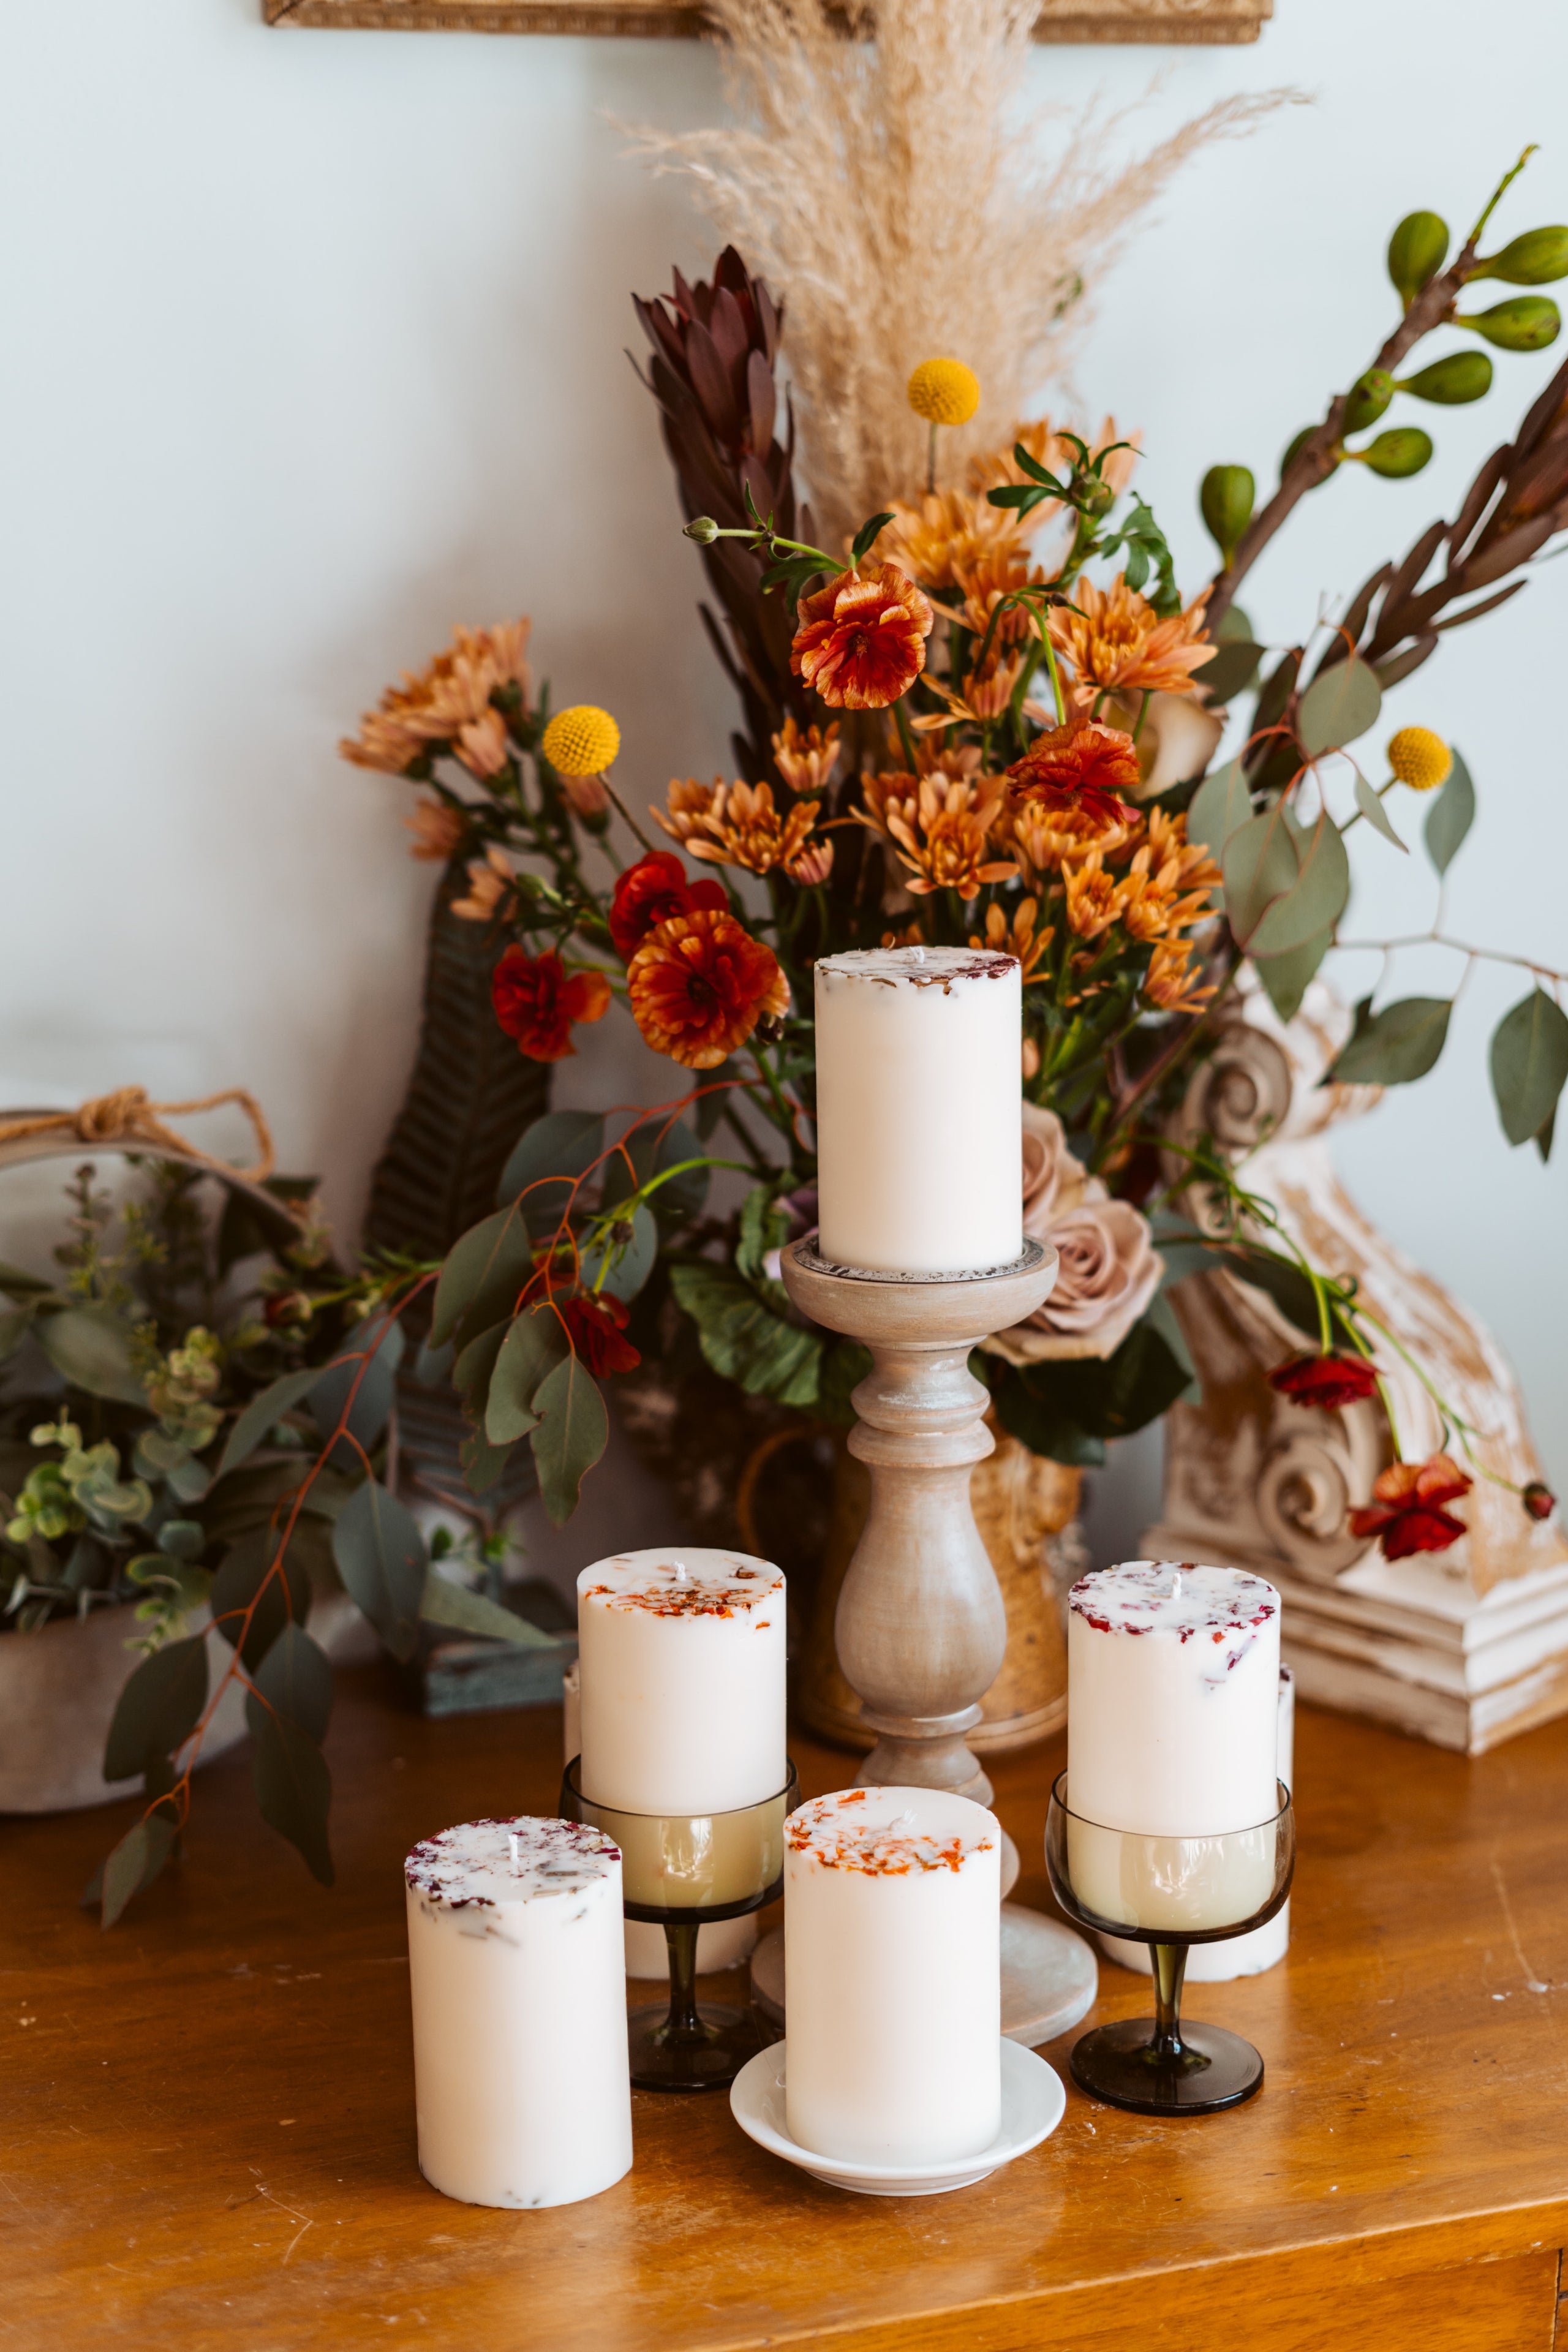 CandleScience Candle Making Supply - We're already big fans of BW-921  Pillar Soy Wax. This wax makes gorgeous pillar candles and wax melts, has a  great fragrance throw, and takes color beautifully!